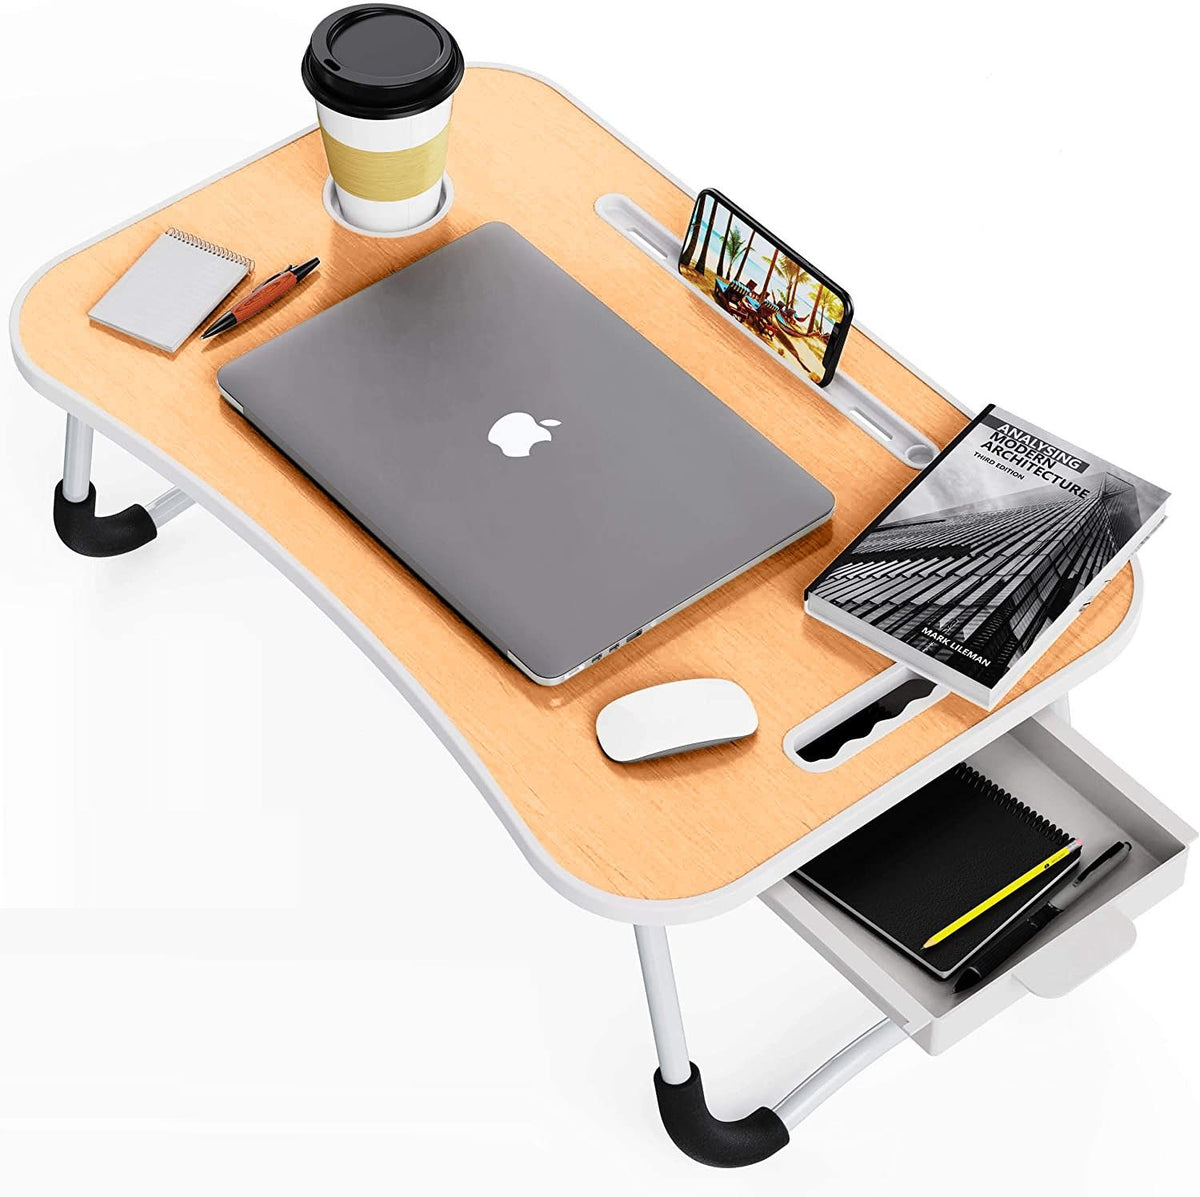 CARLA HOME Laptop Bed Desk with Storage and foldable legs for Adults, Kids &amp; Home Office